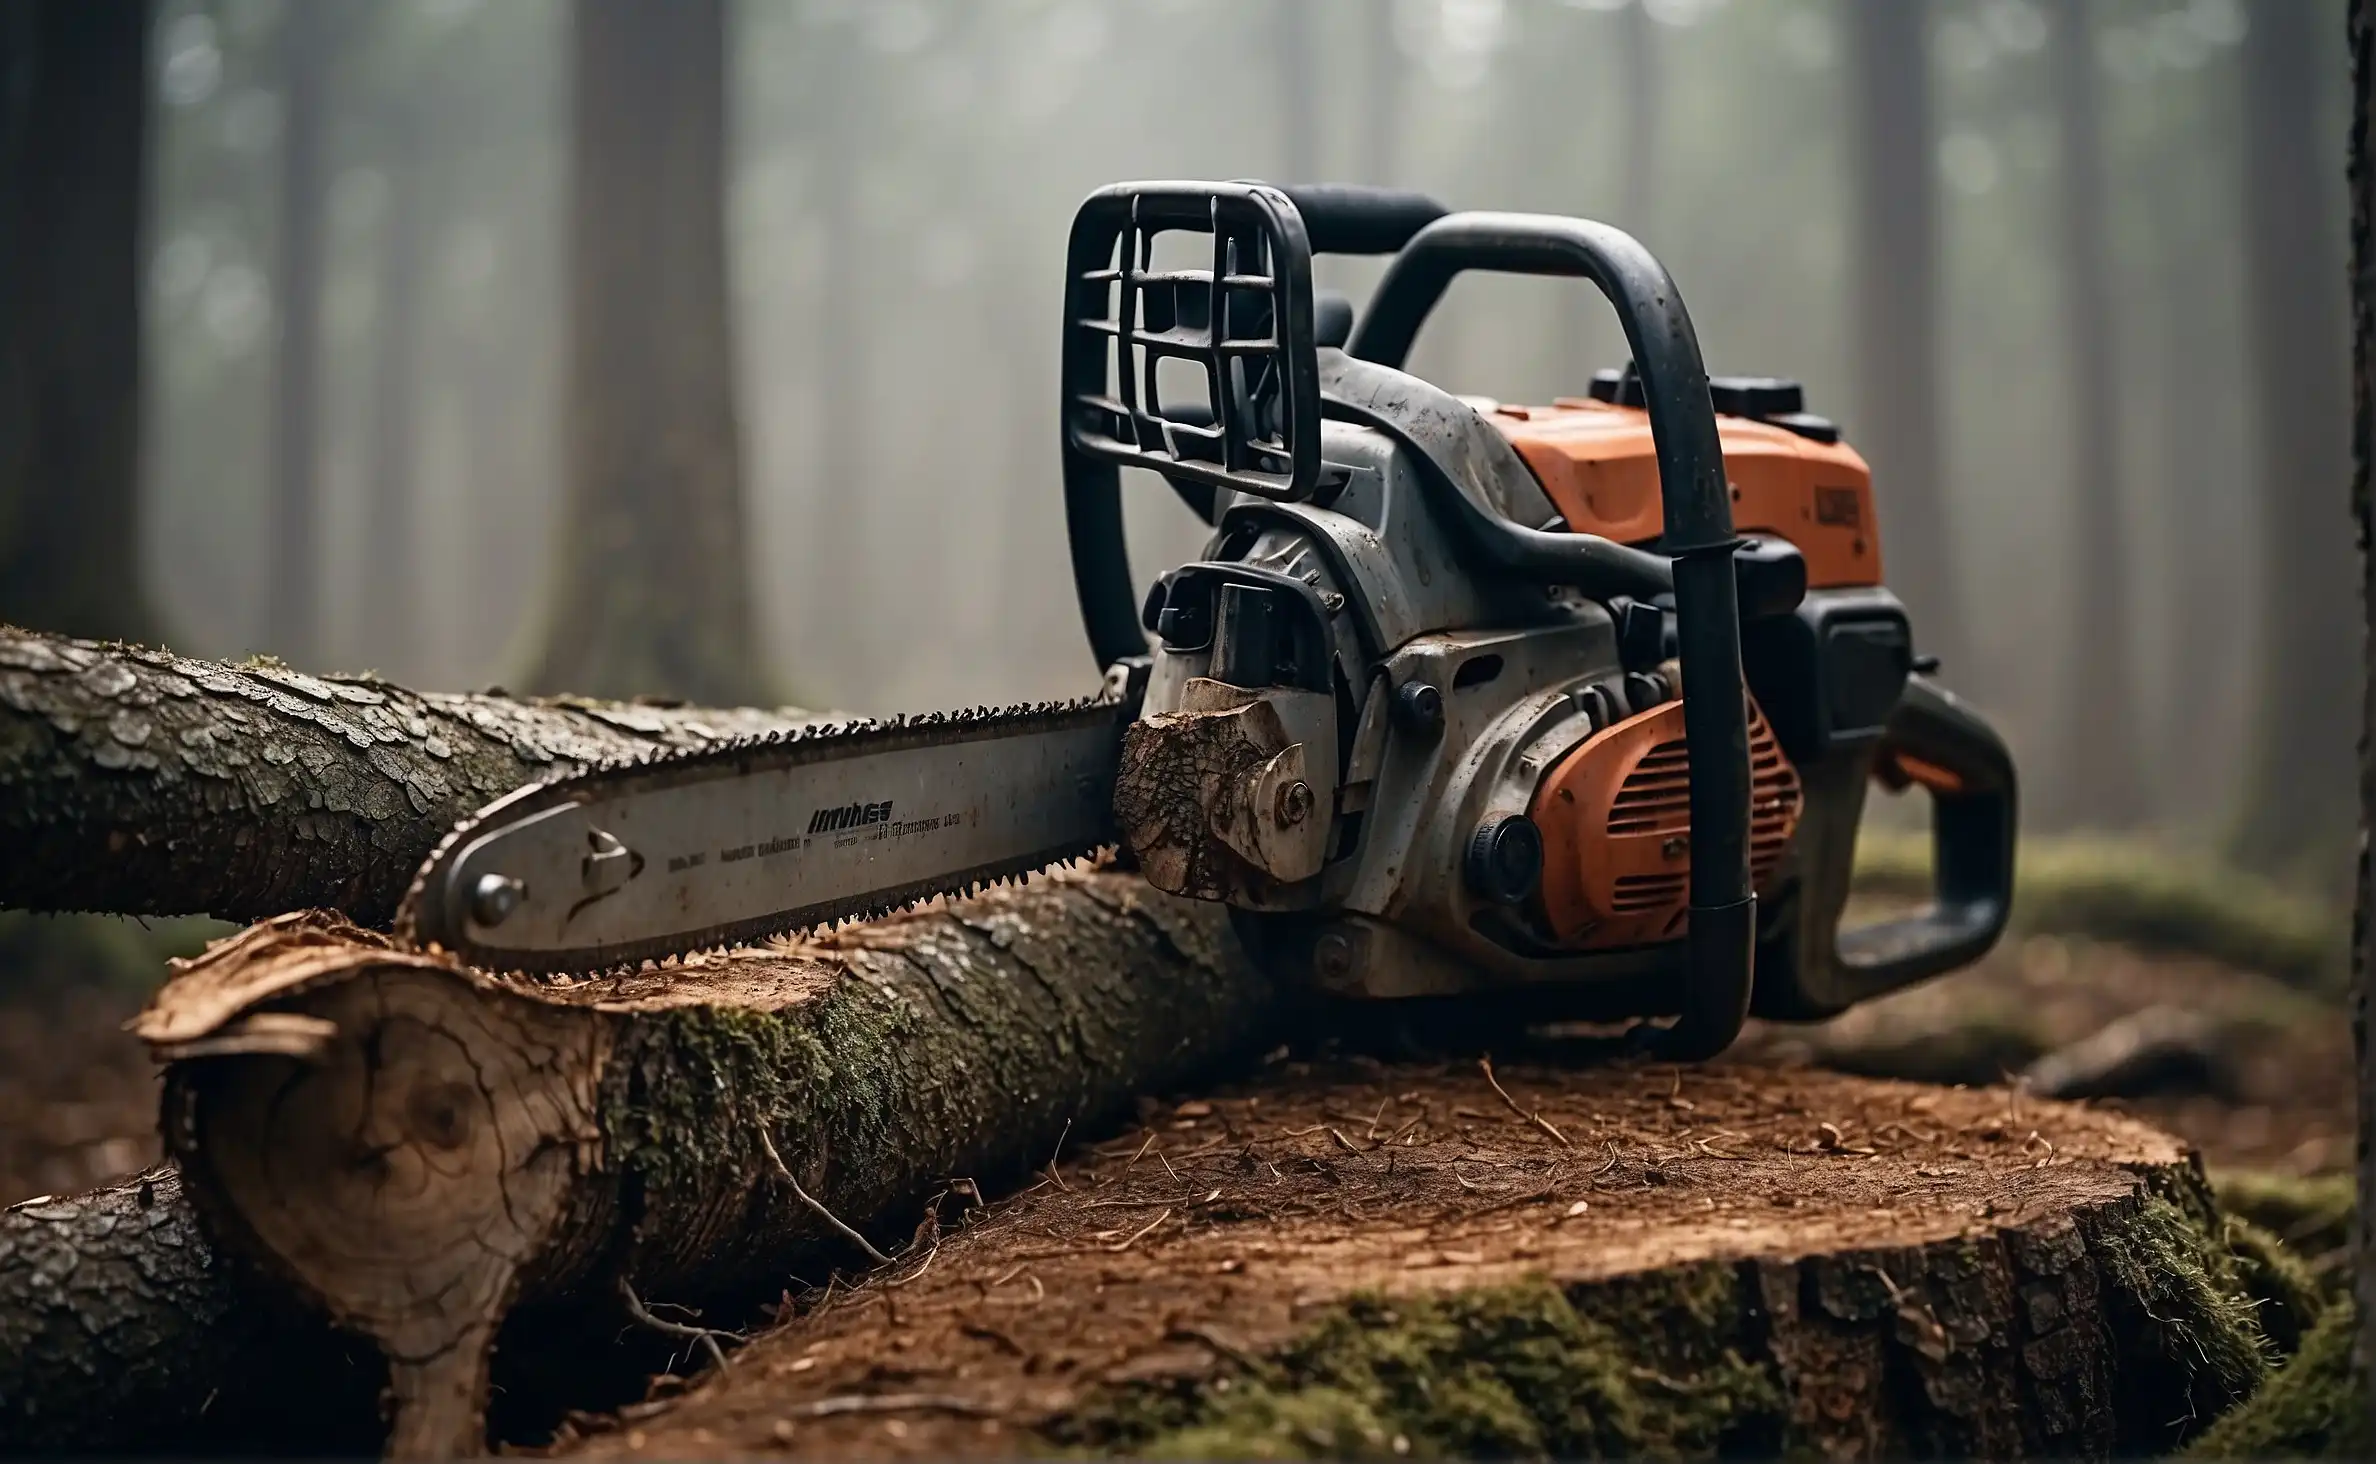 A 20 inch chainsaw cutting a tree with a diameter of up to 40 inches